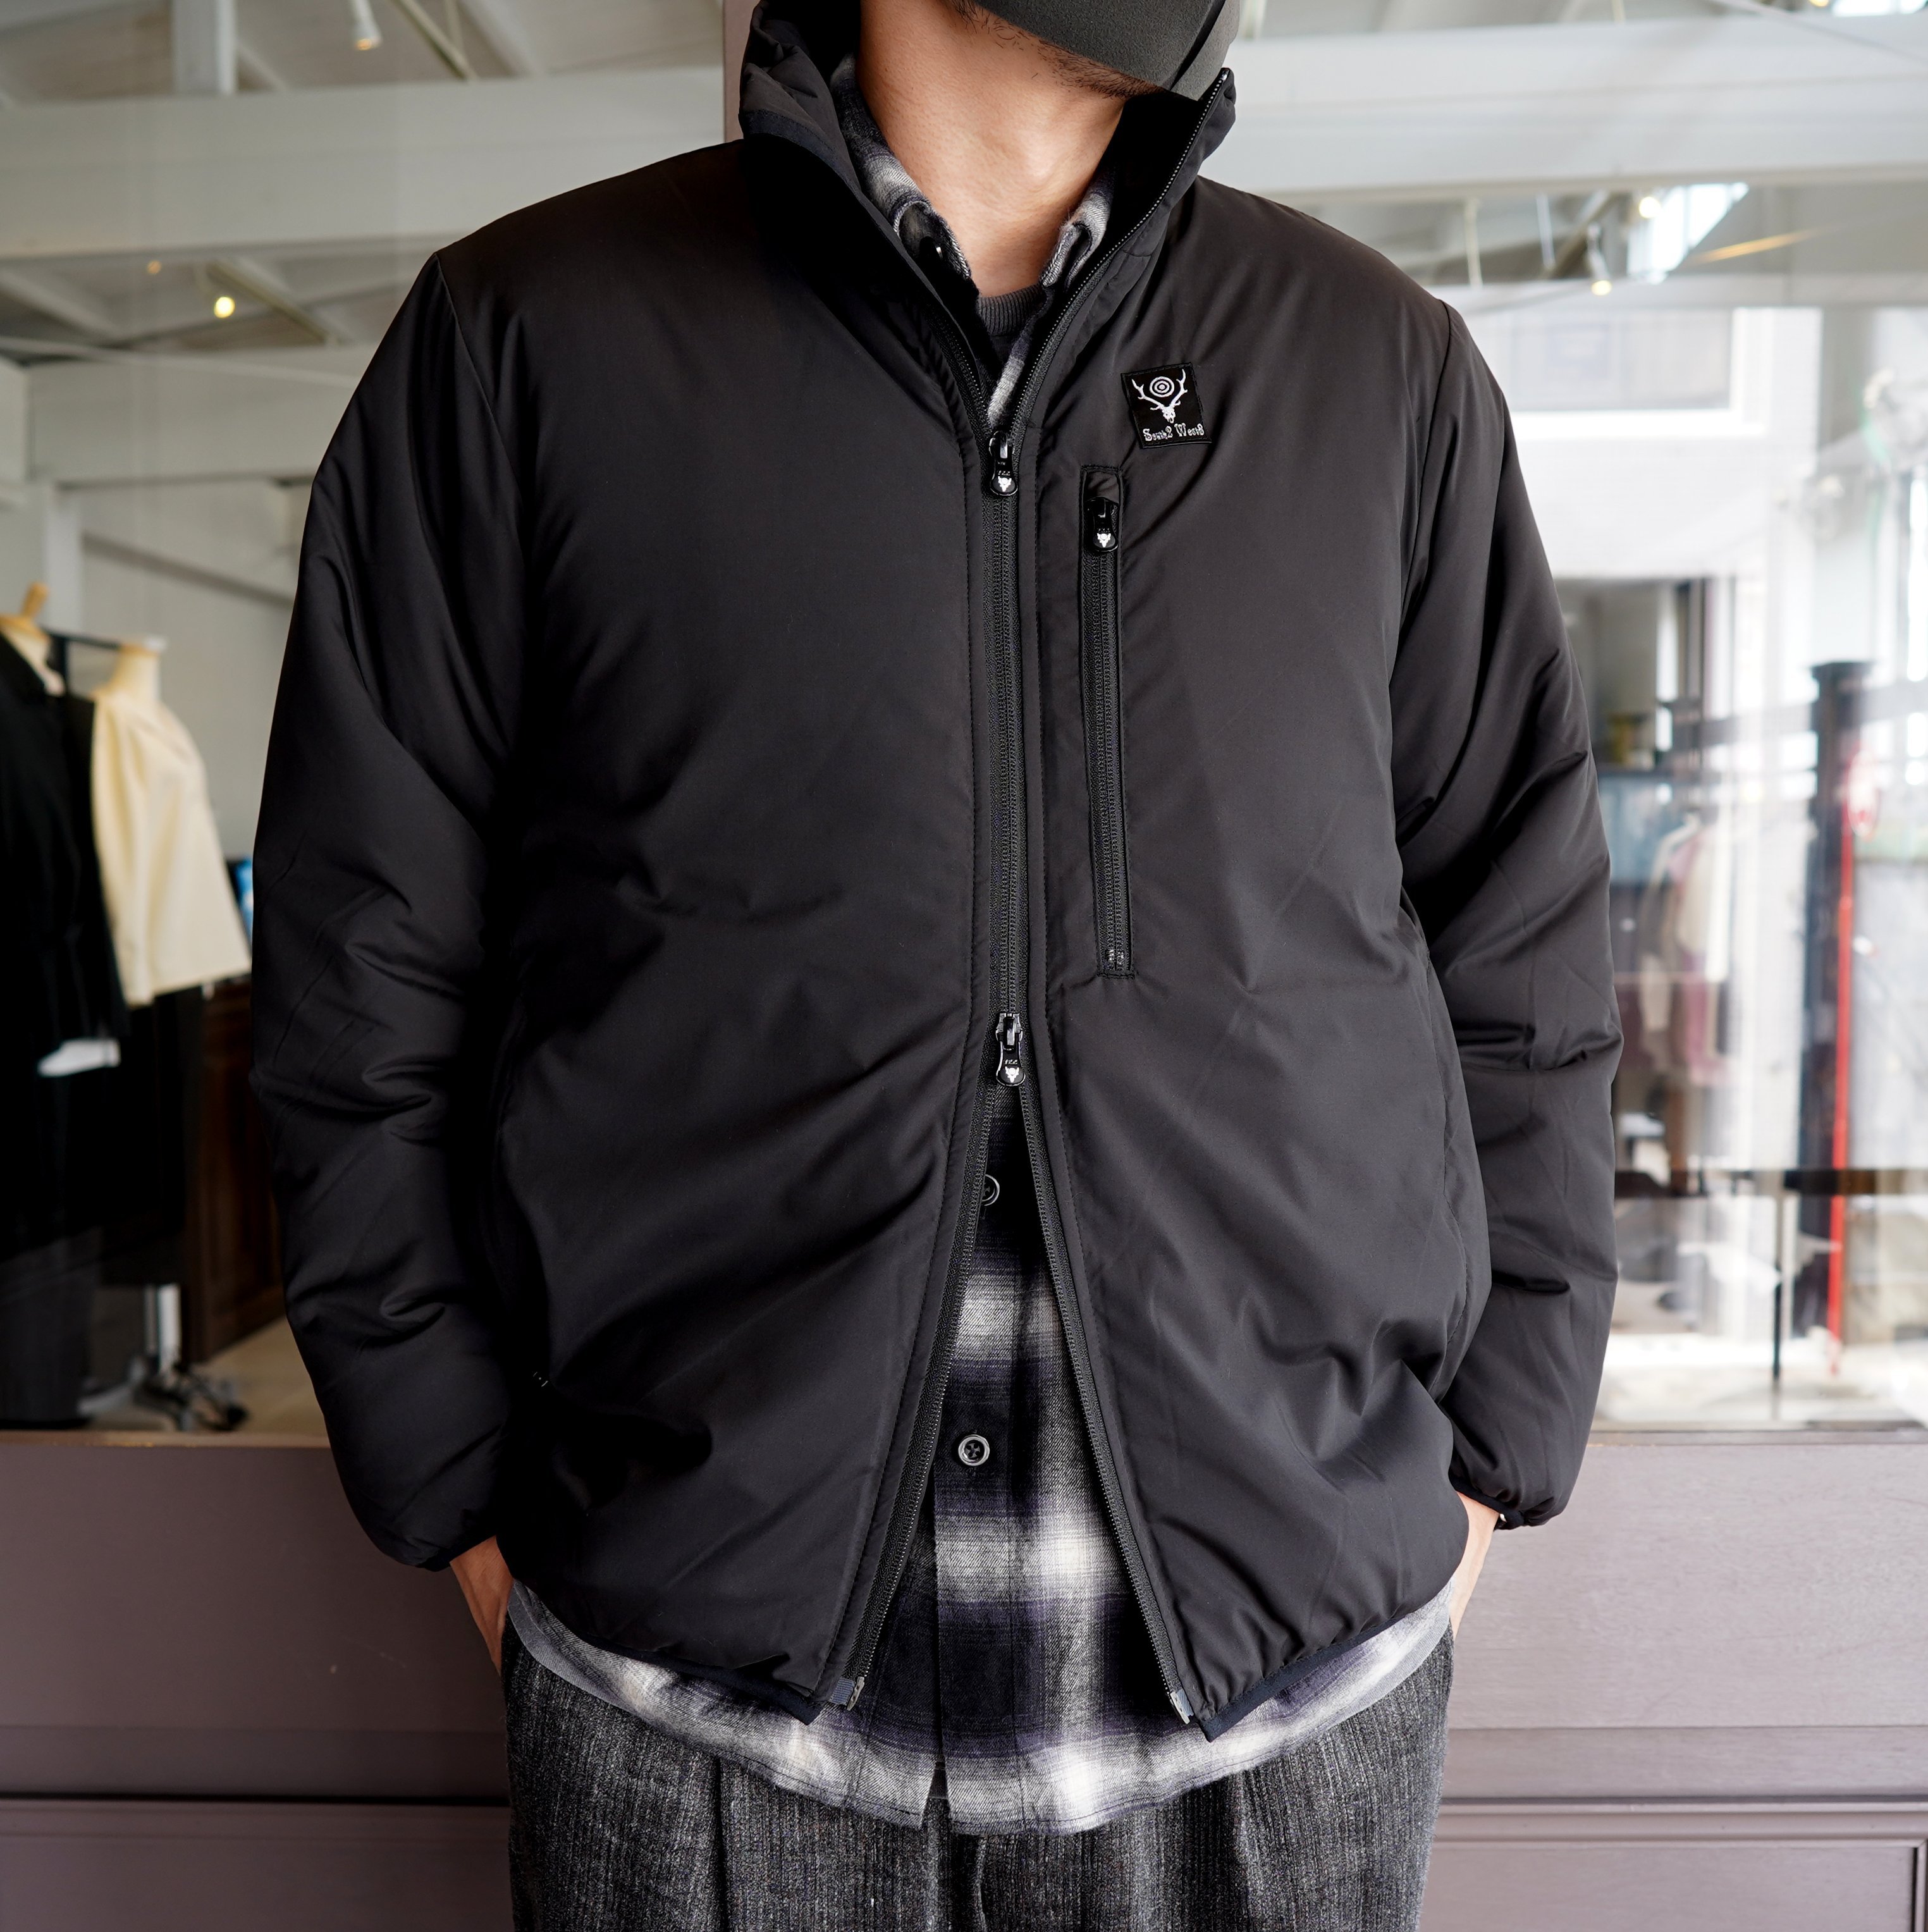 South2 West8(サウスツーウエストエイト)/Insulator jacket -Poly peach skin -BLACK- #JO761(1)